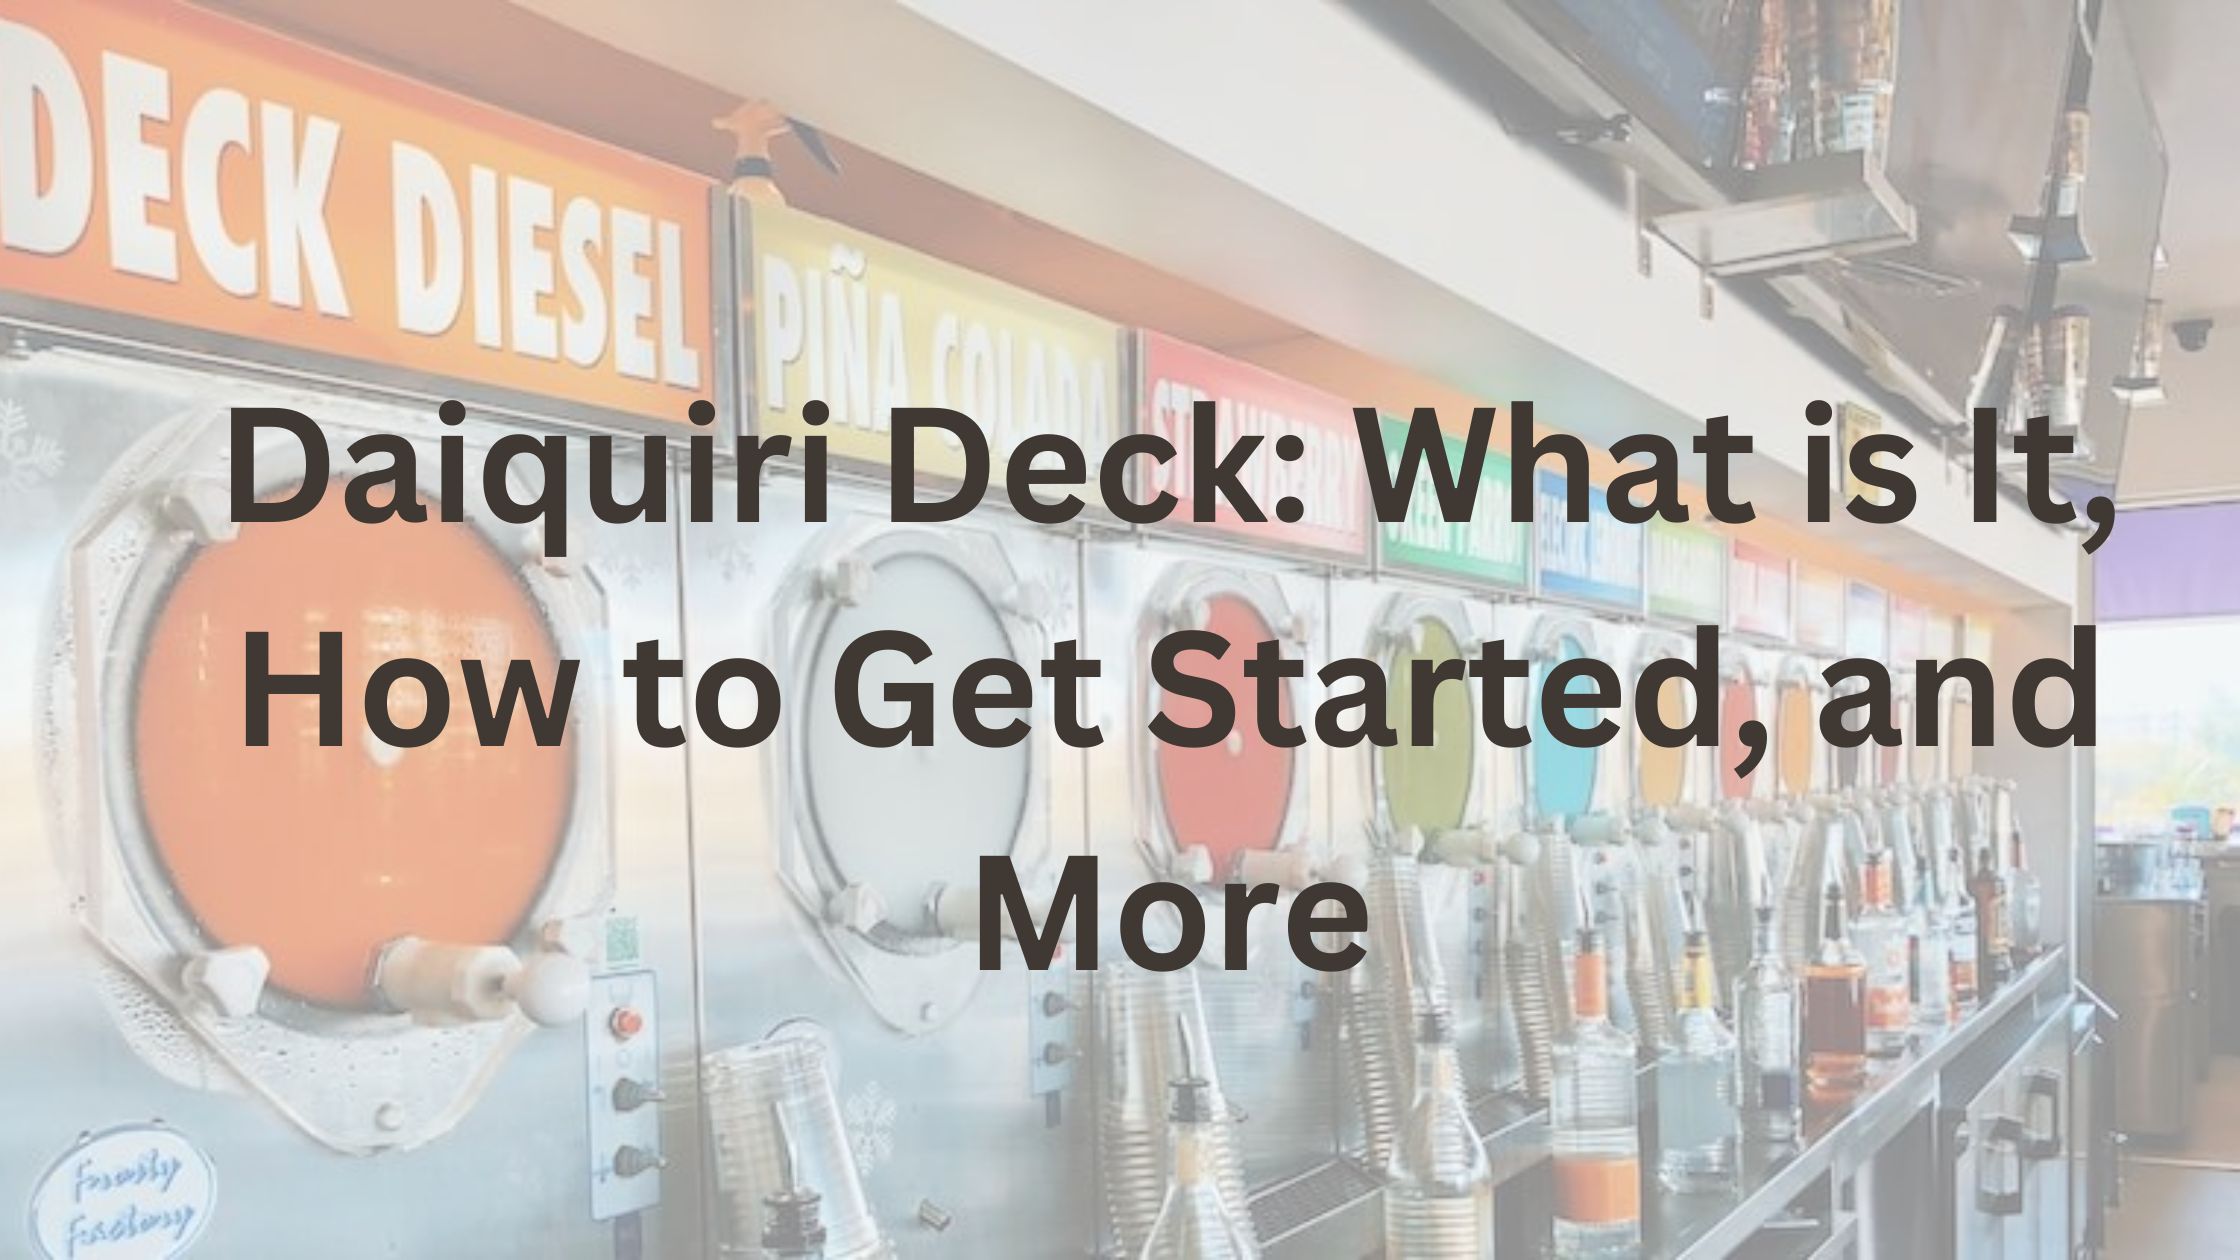 Daiquiri Deck: What is It, How to Get Started, and More